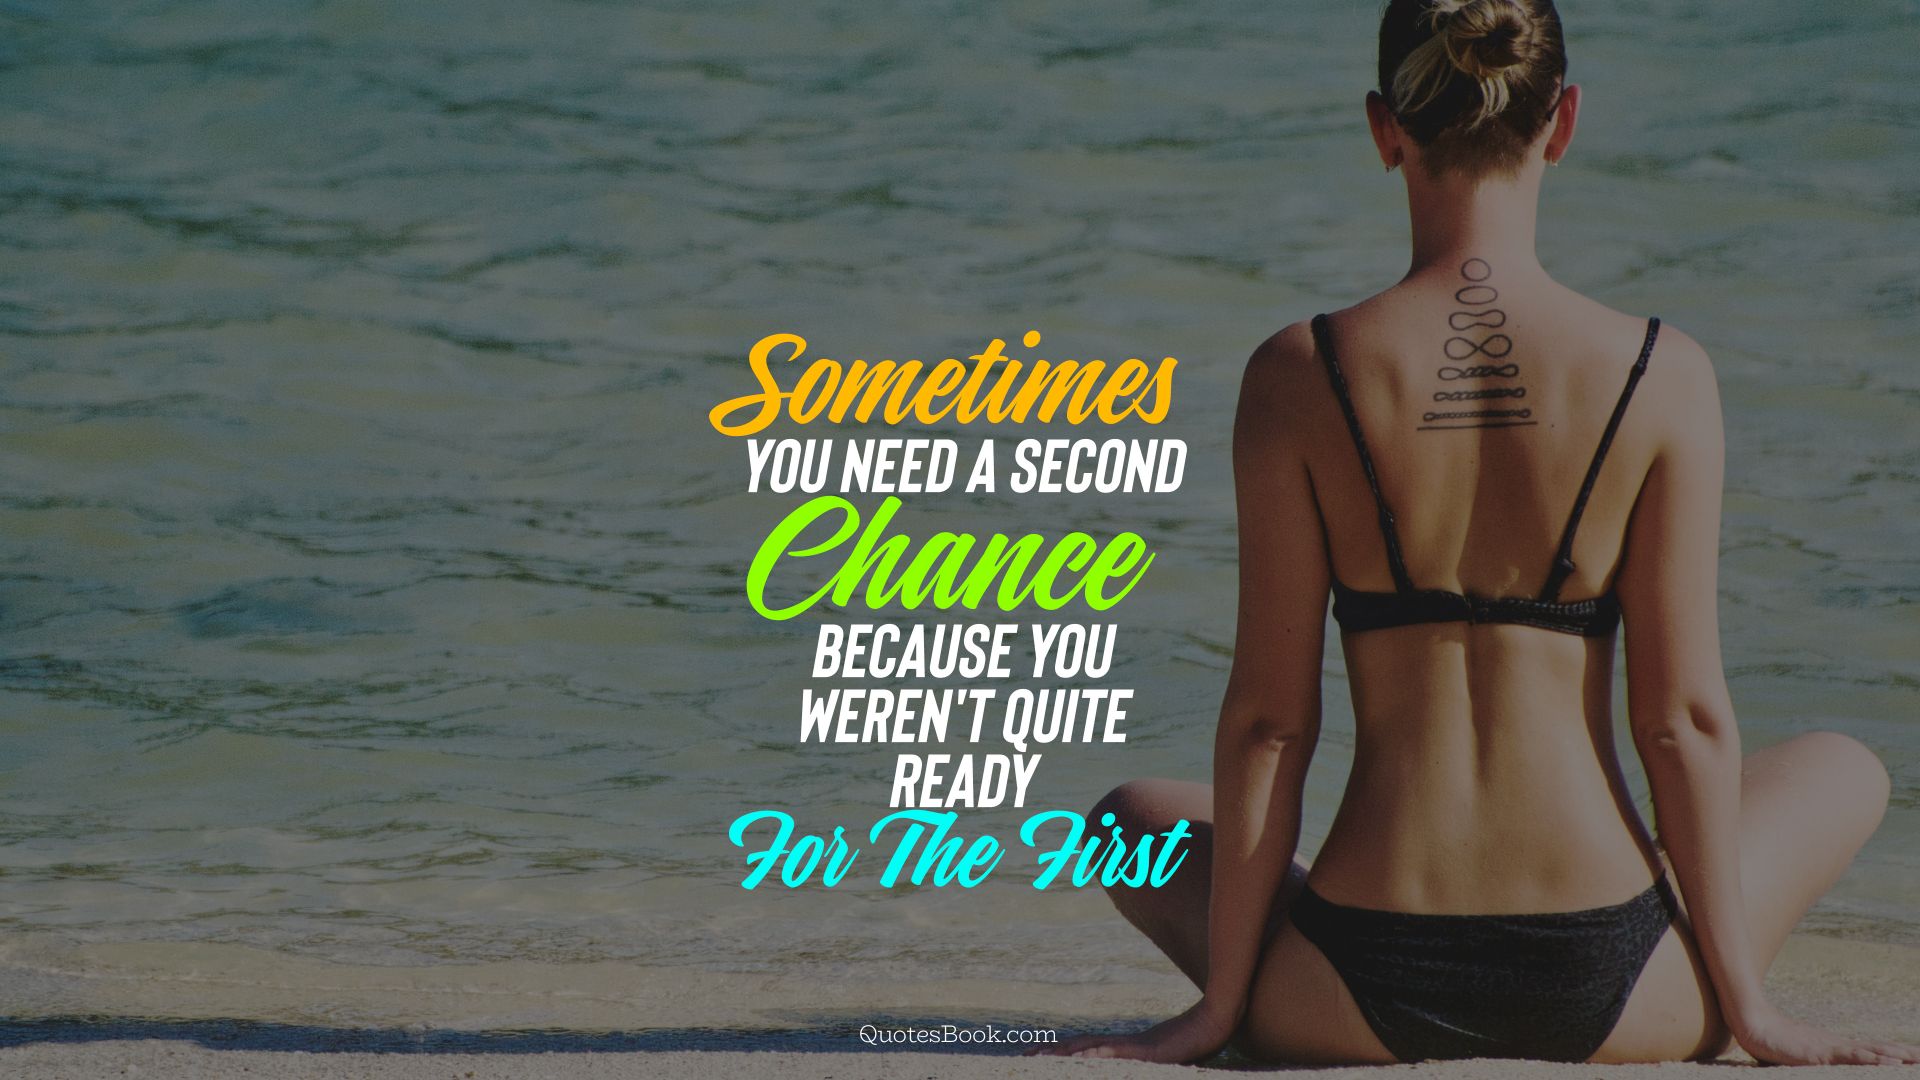 Sometimes you need a second chance because you weren't quite ready for the first 